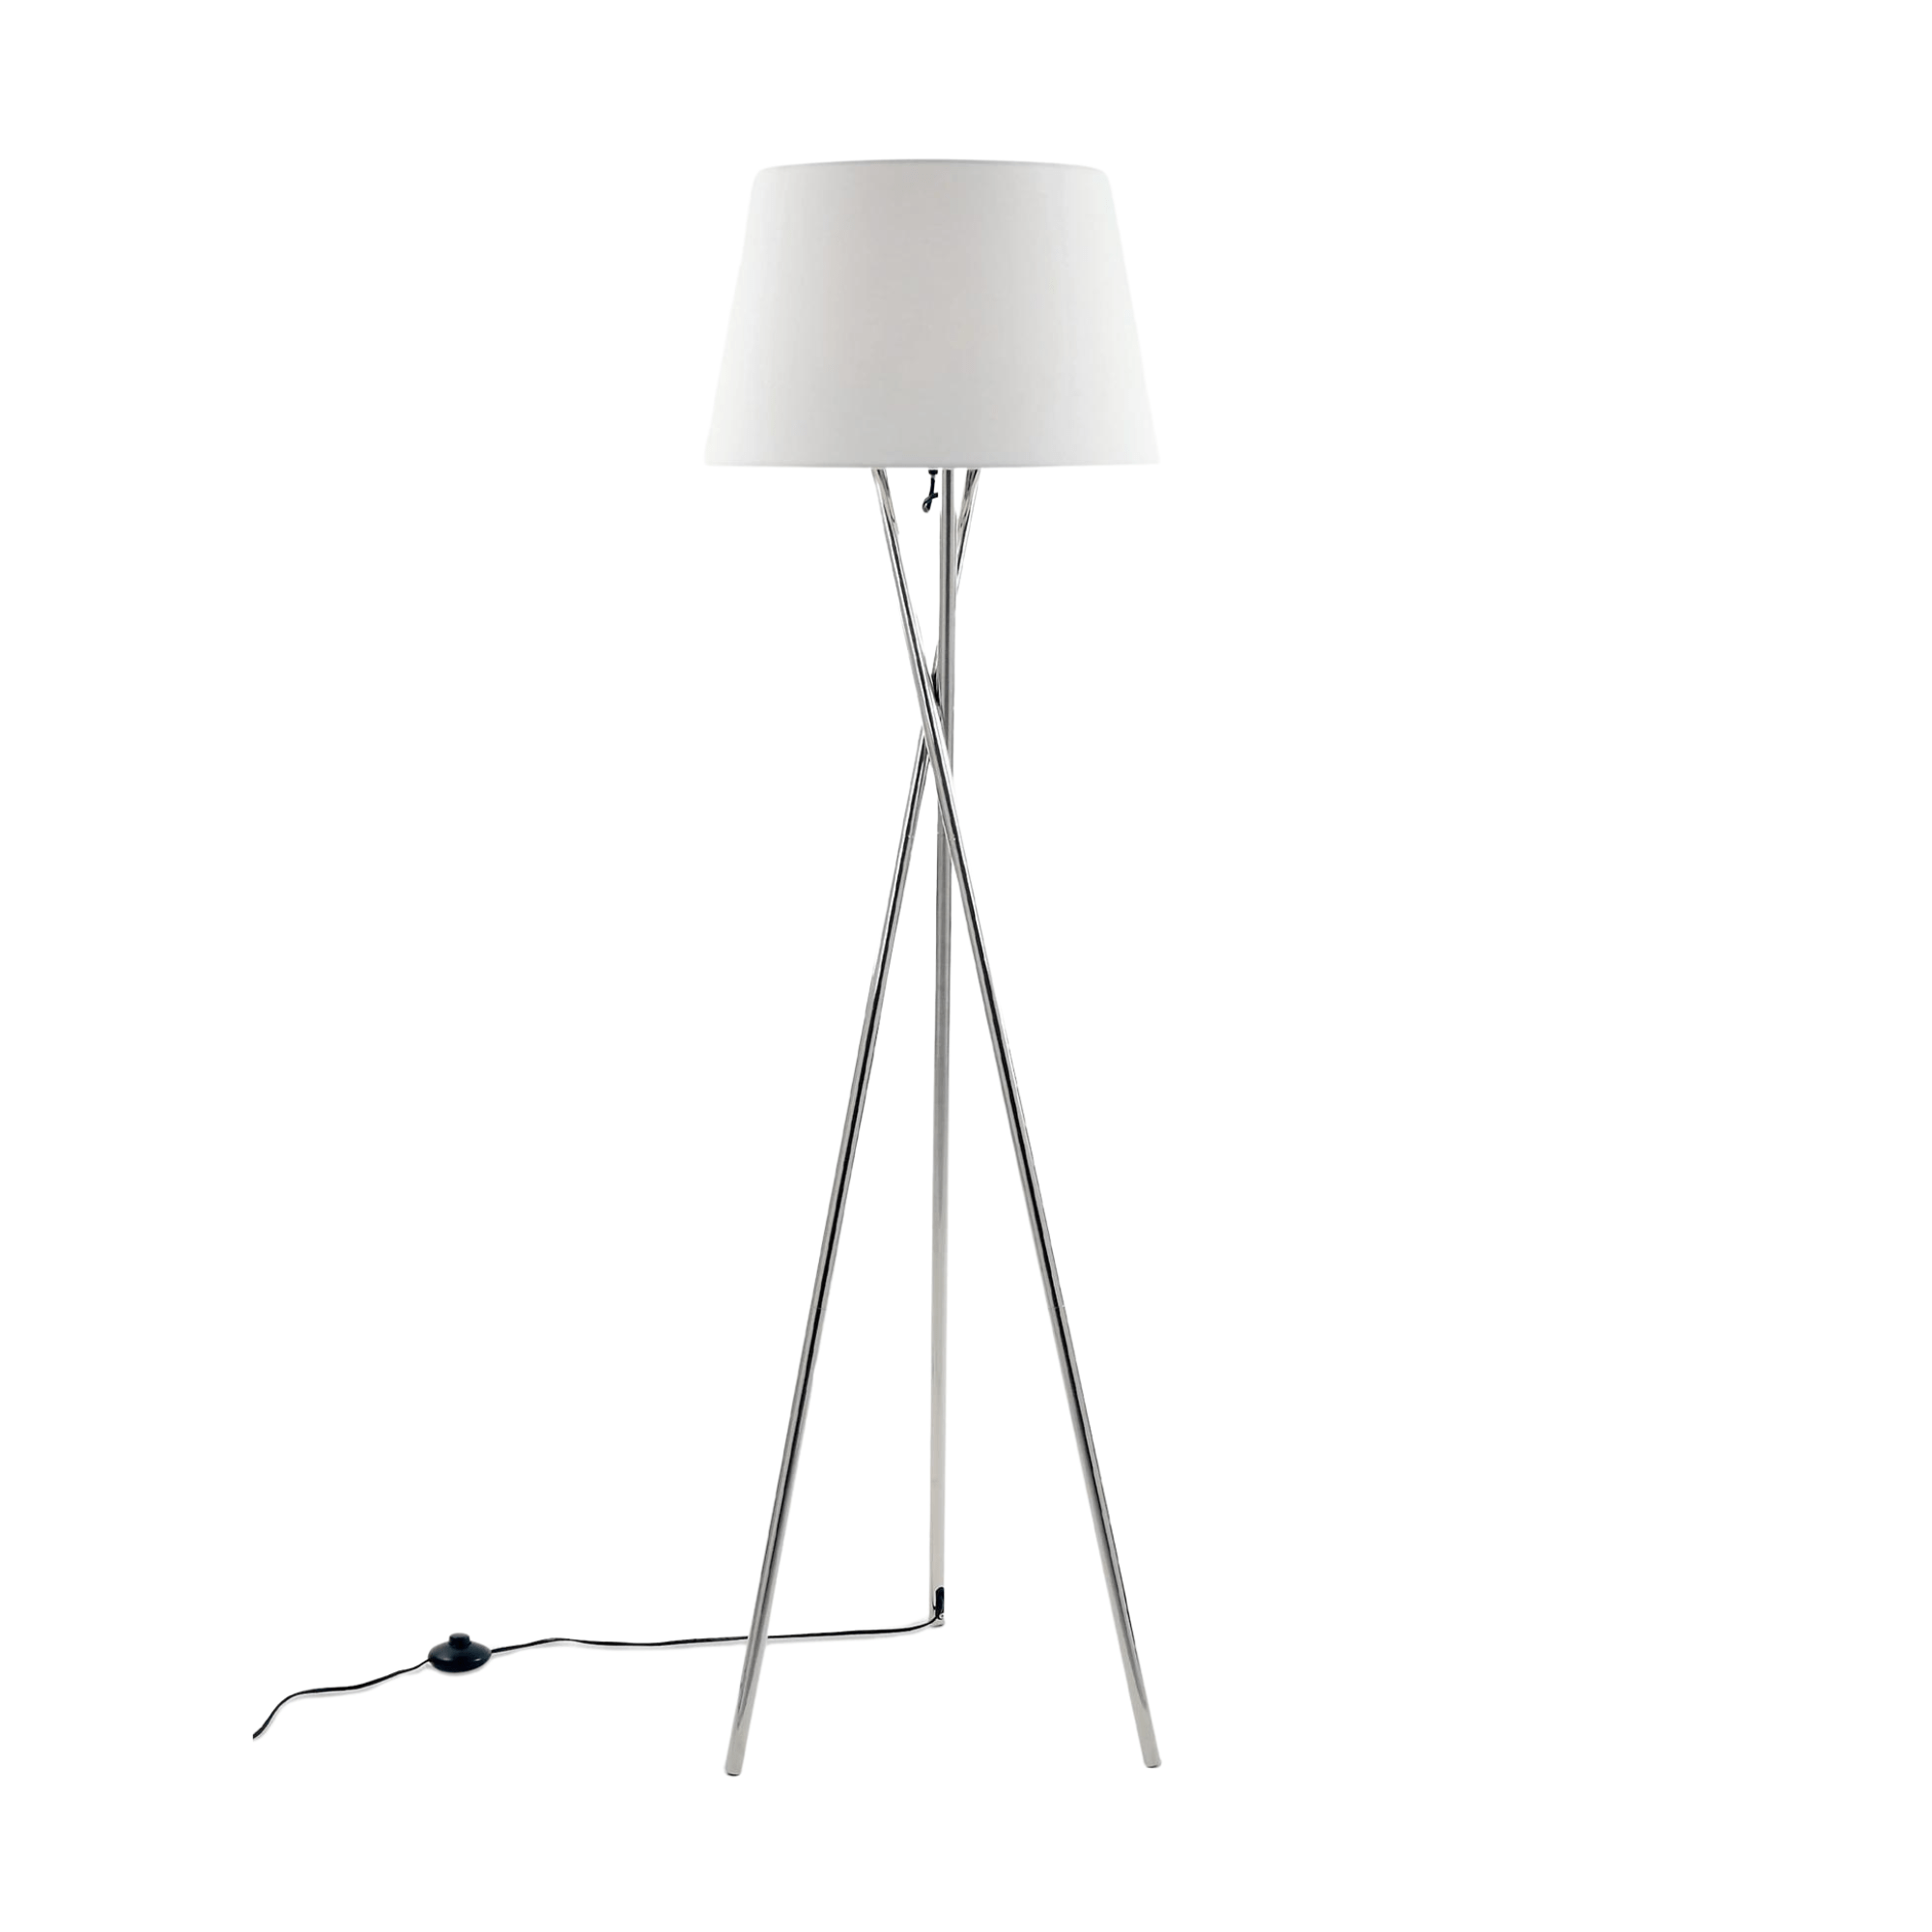 Buy Modern Metal Tripod Floor Lamp With White Tapered Shade Light - A51 | Shop at Supply Master Accra, Ghana Lamps & Lightings Buy Tools hardware Building materials